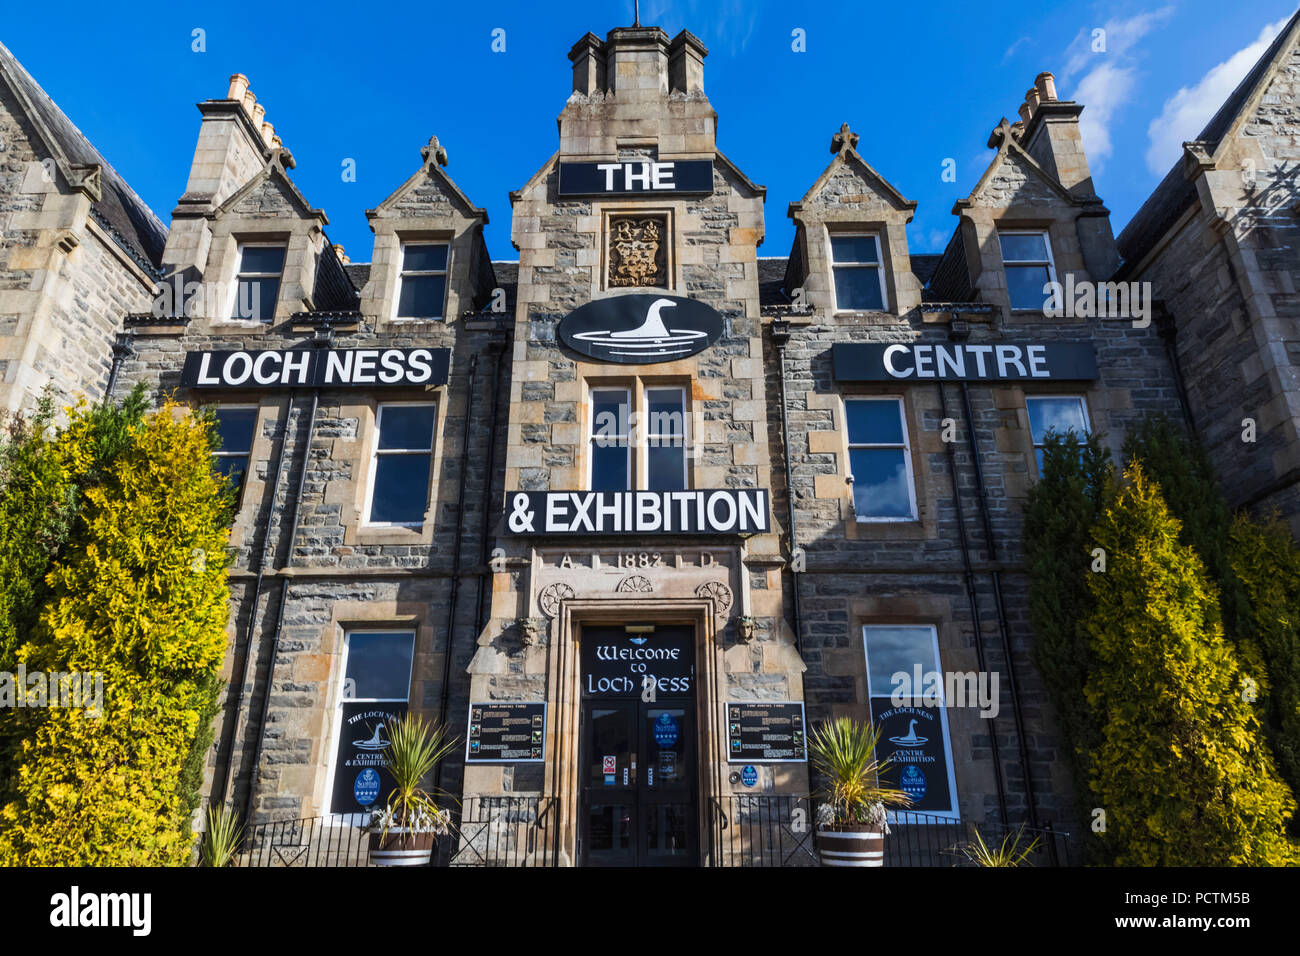 Great Britain, Scotland, Scottish Highlands, Loch Ness, The Loch Ness Centre and Exhibition Building Stock Photo